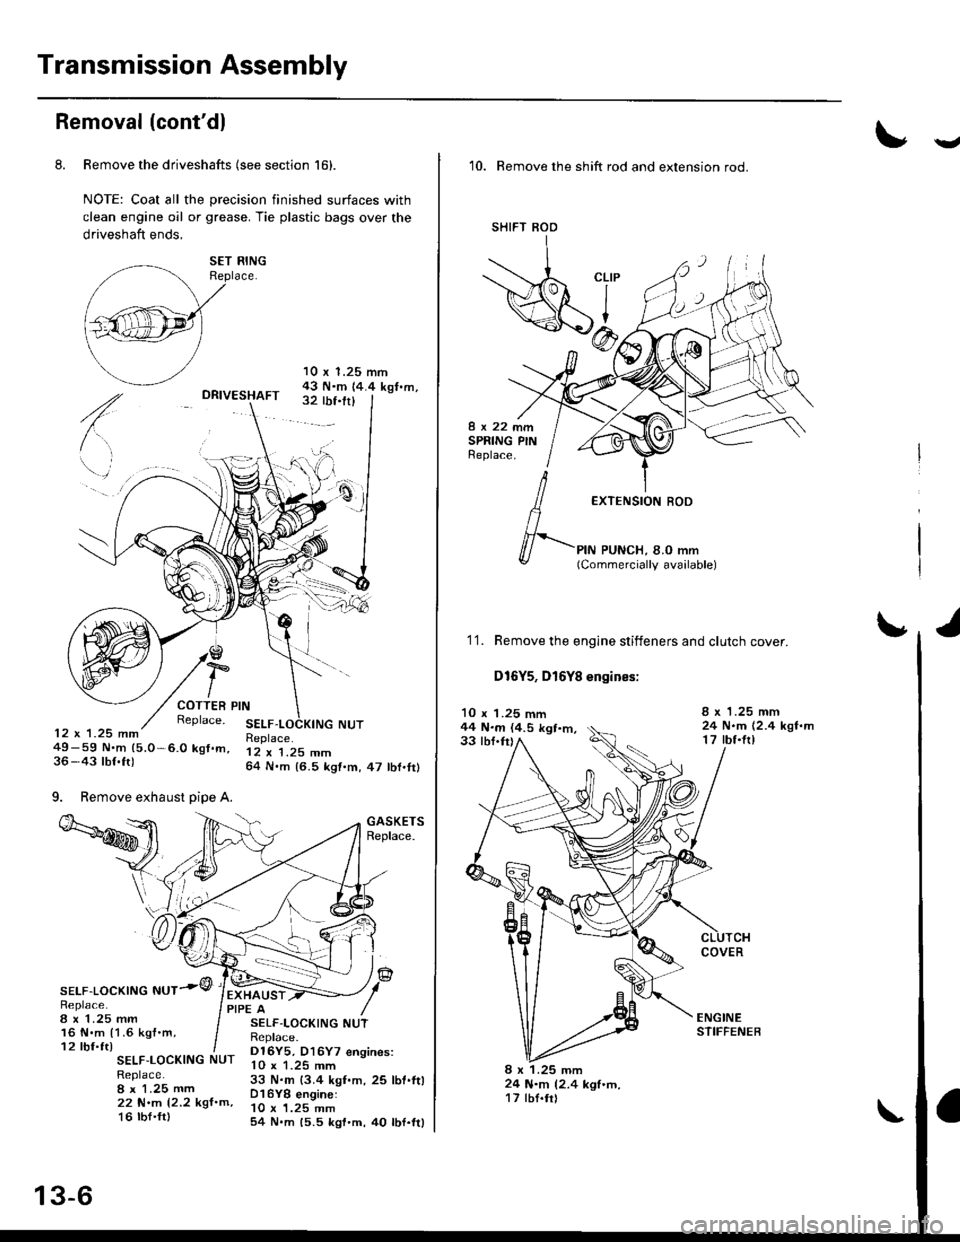 HONDA CIVIC 1996 6.G Service Manual Transmission Assembly
Removal (contdl
8. Remove the driveshafts (see section 161.
NOTE: Coat all the precision finished surfaces with
clean engine oil or grease. Tie plastic bags over the
driveshaft 